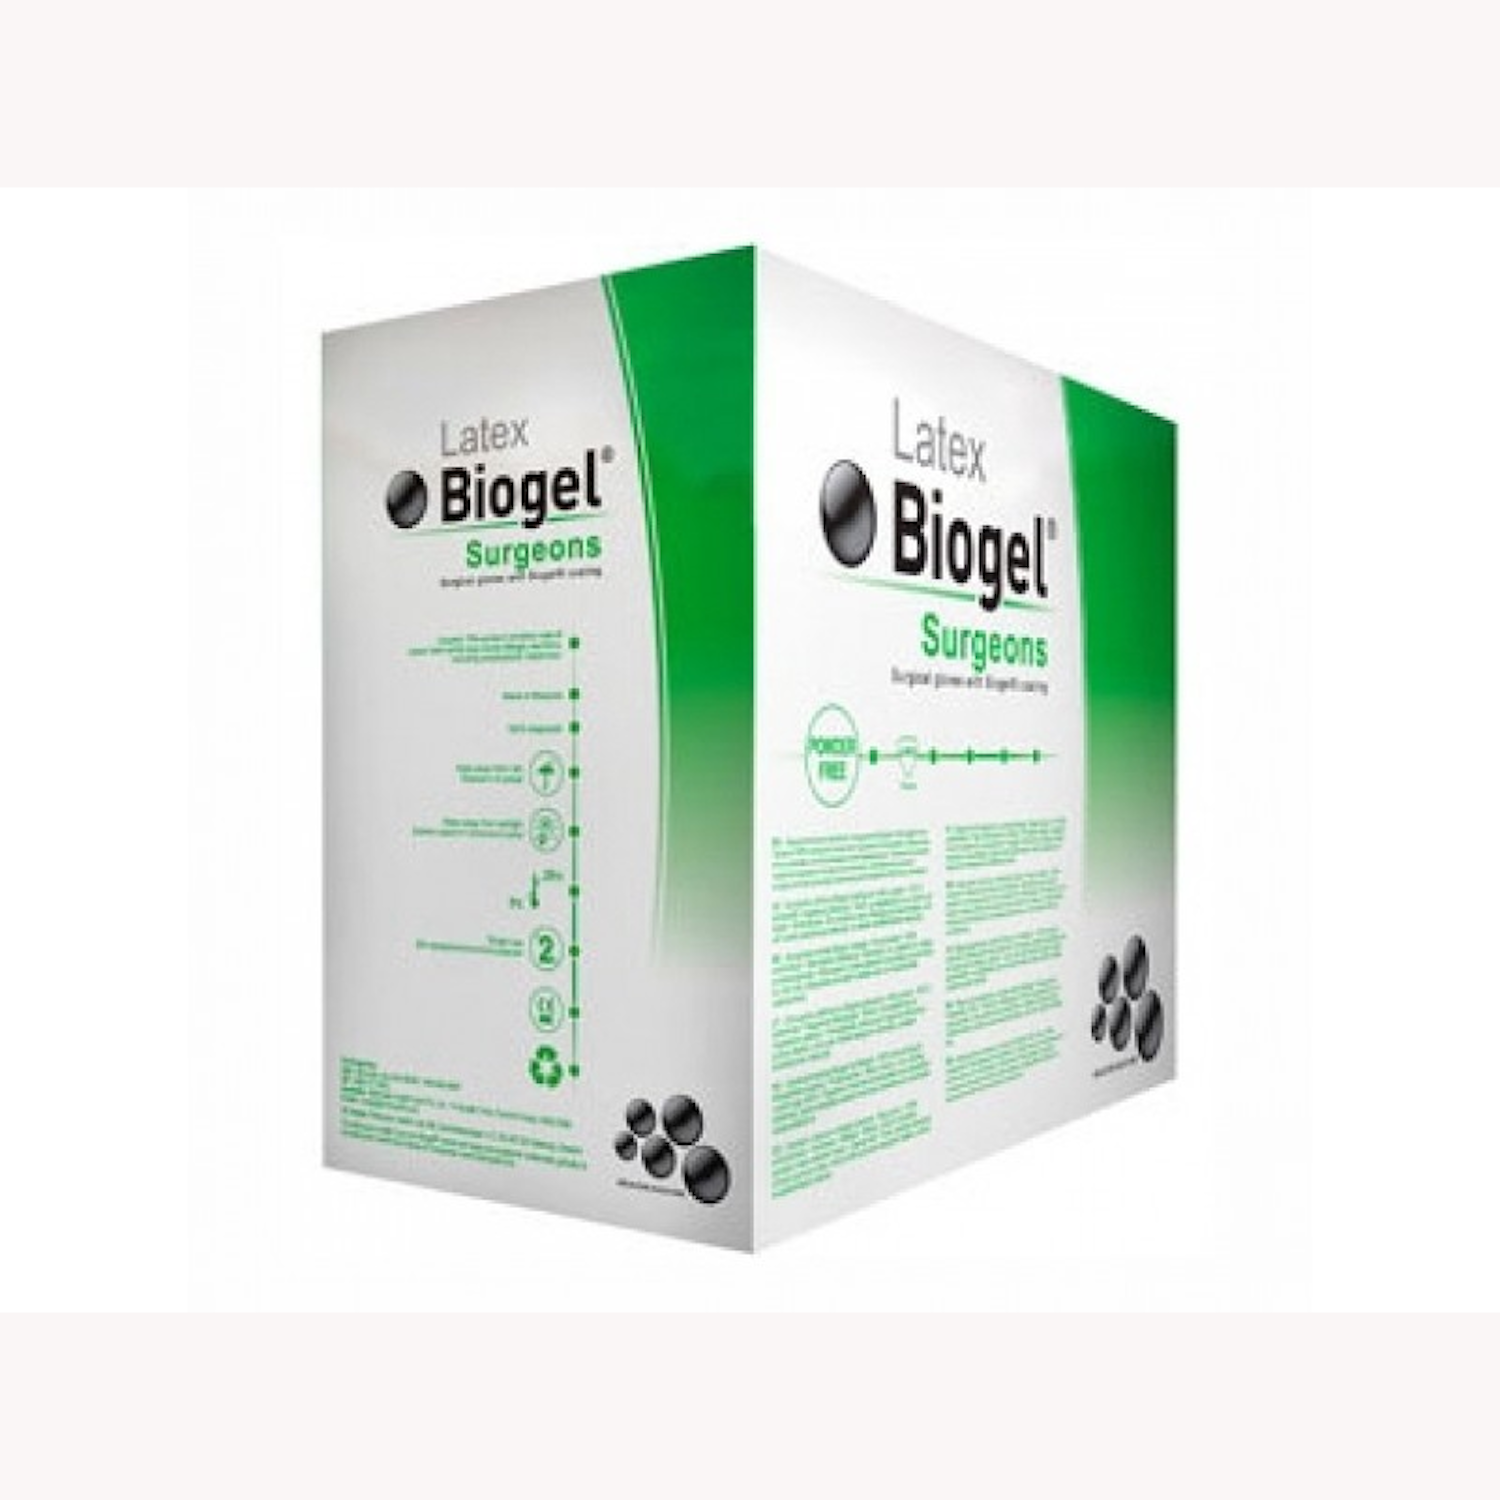 Biogel Surgeon's Latex Gloves | Powder Free | Sterile | Size 8 | Pack of 50 Pairs